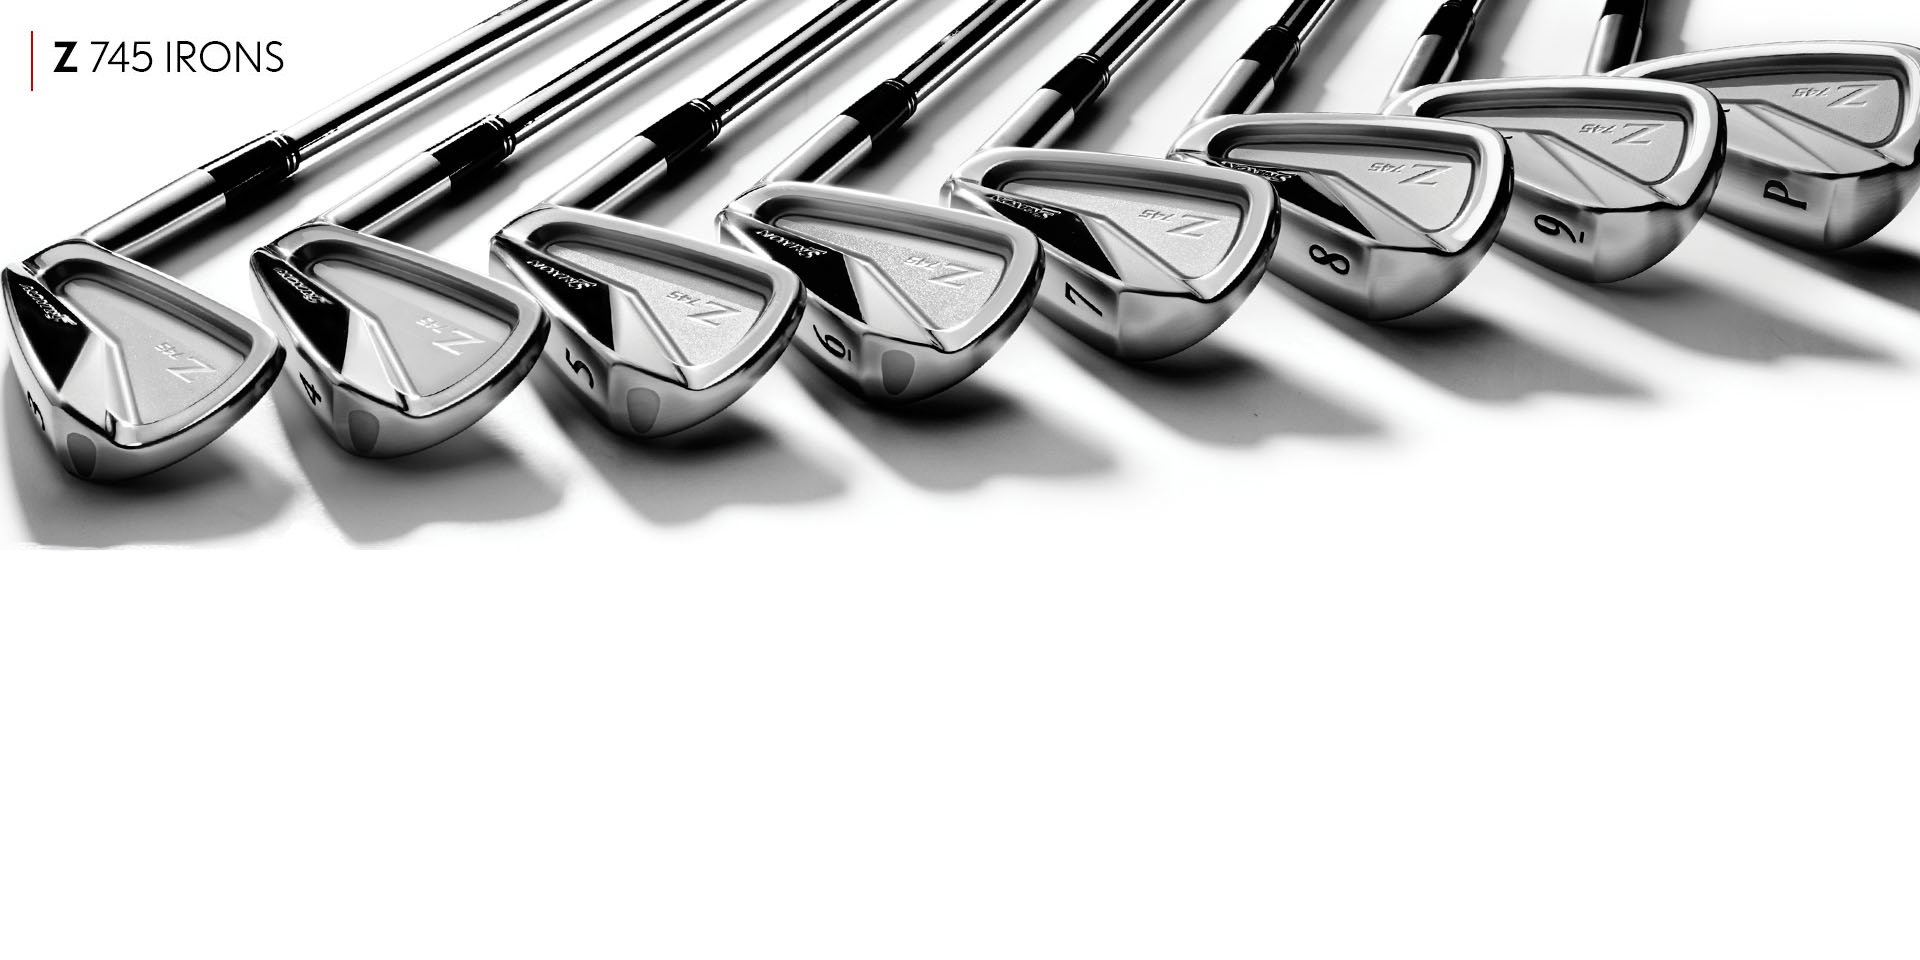 The Z 745 Irons From Srixon are Tools Not Toys